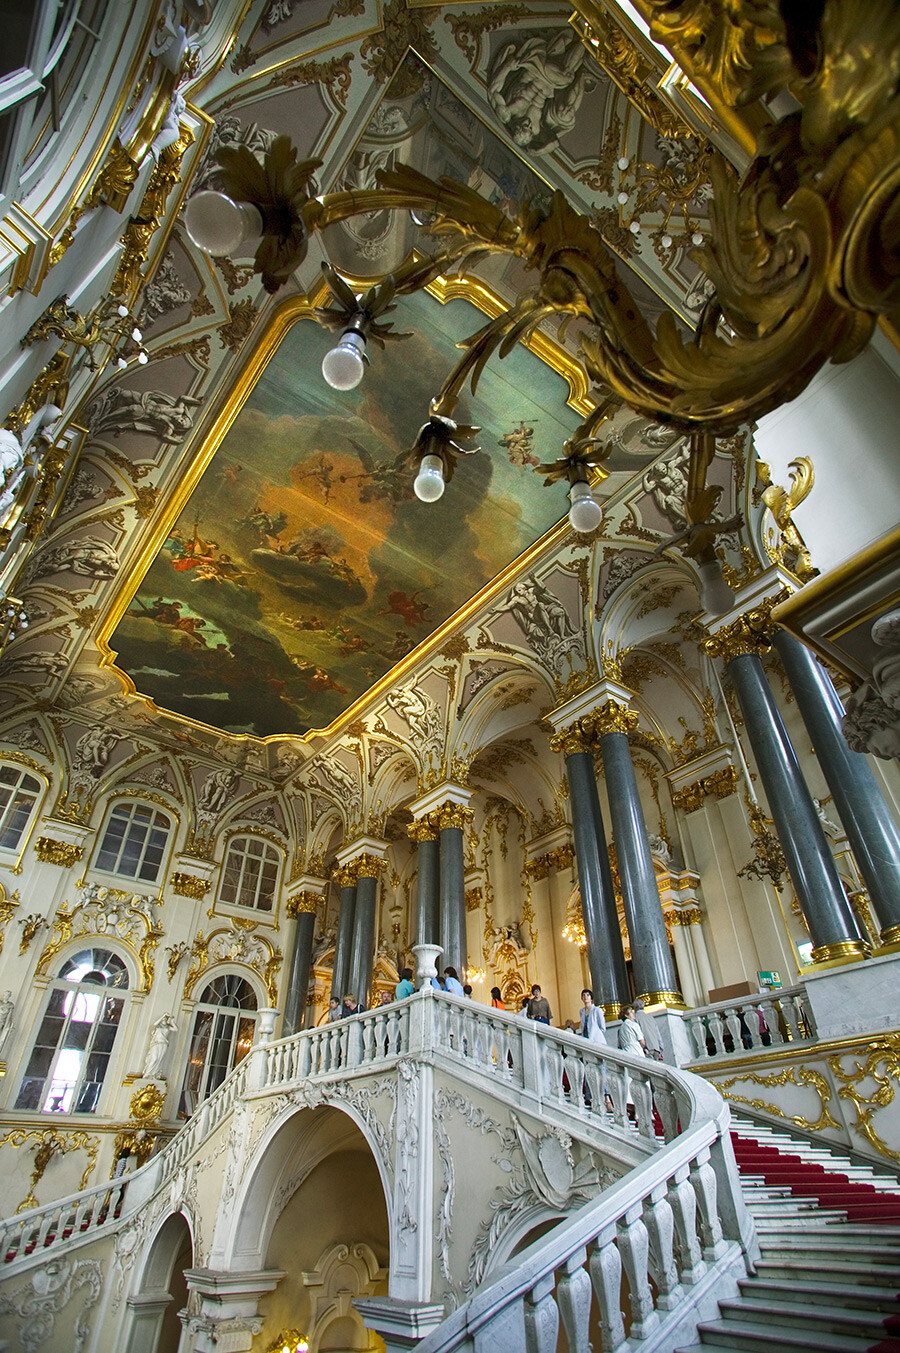 Inside the Winter Palace